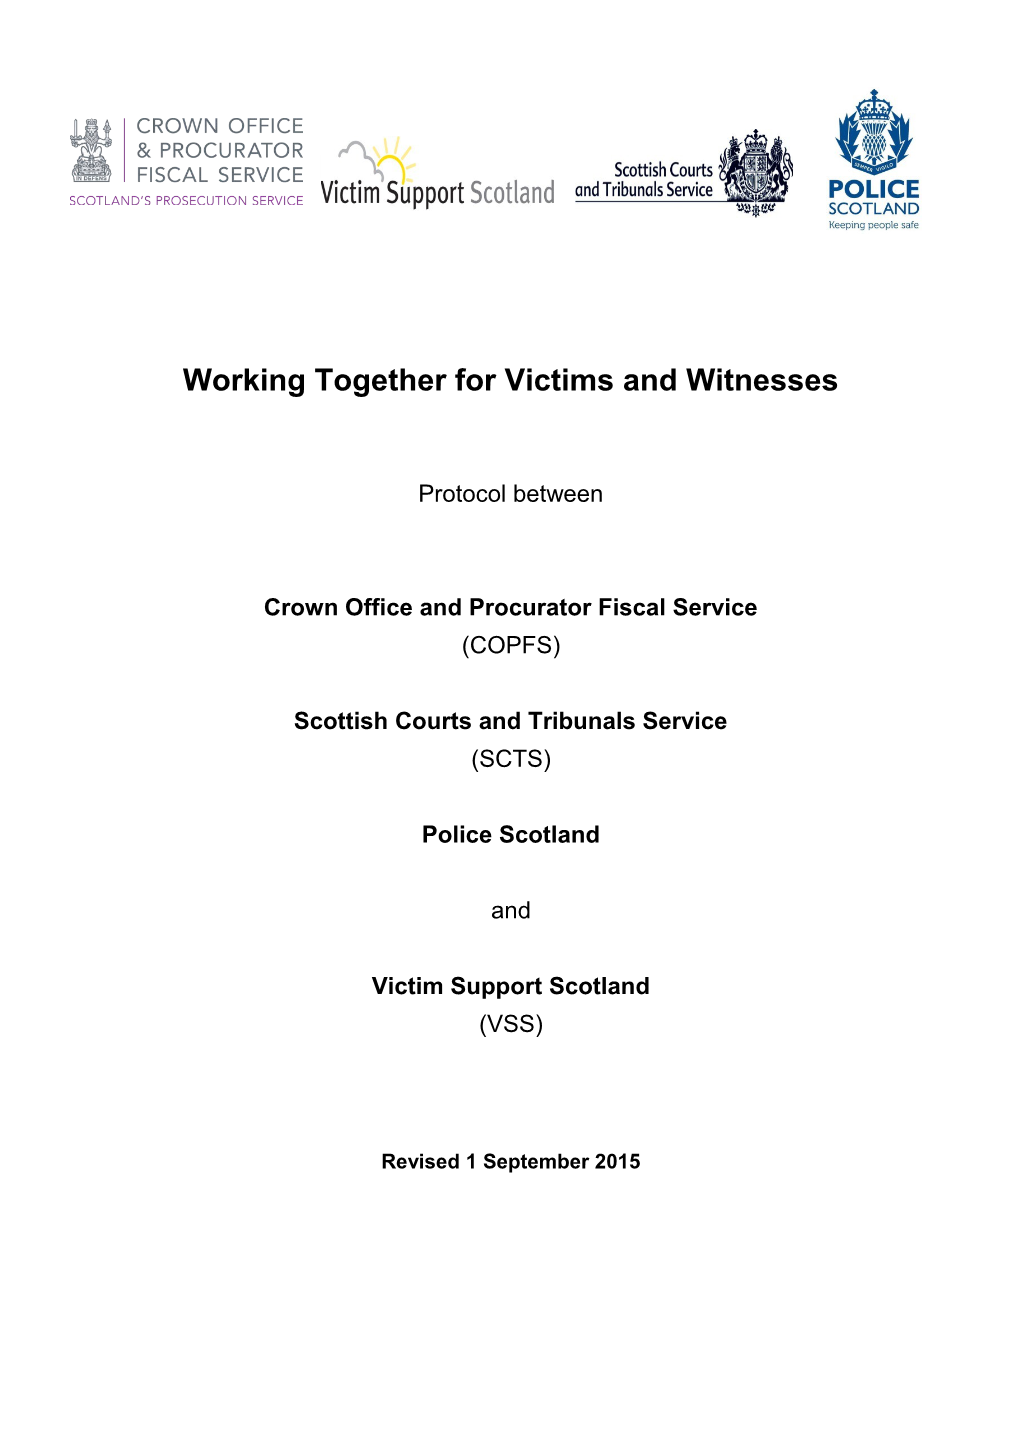 Working Together for Victims and Witnesses